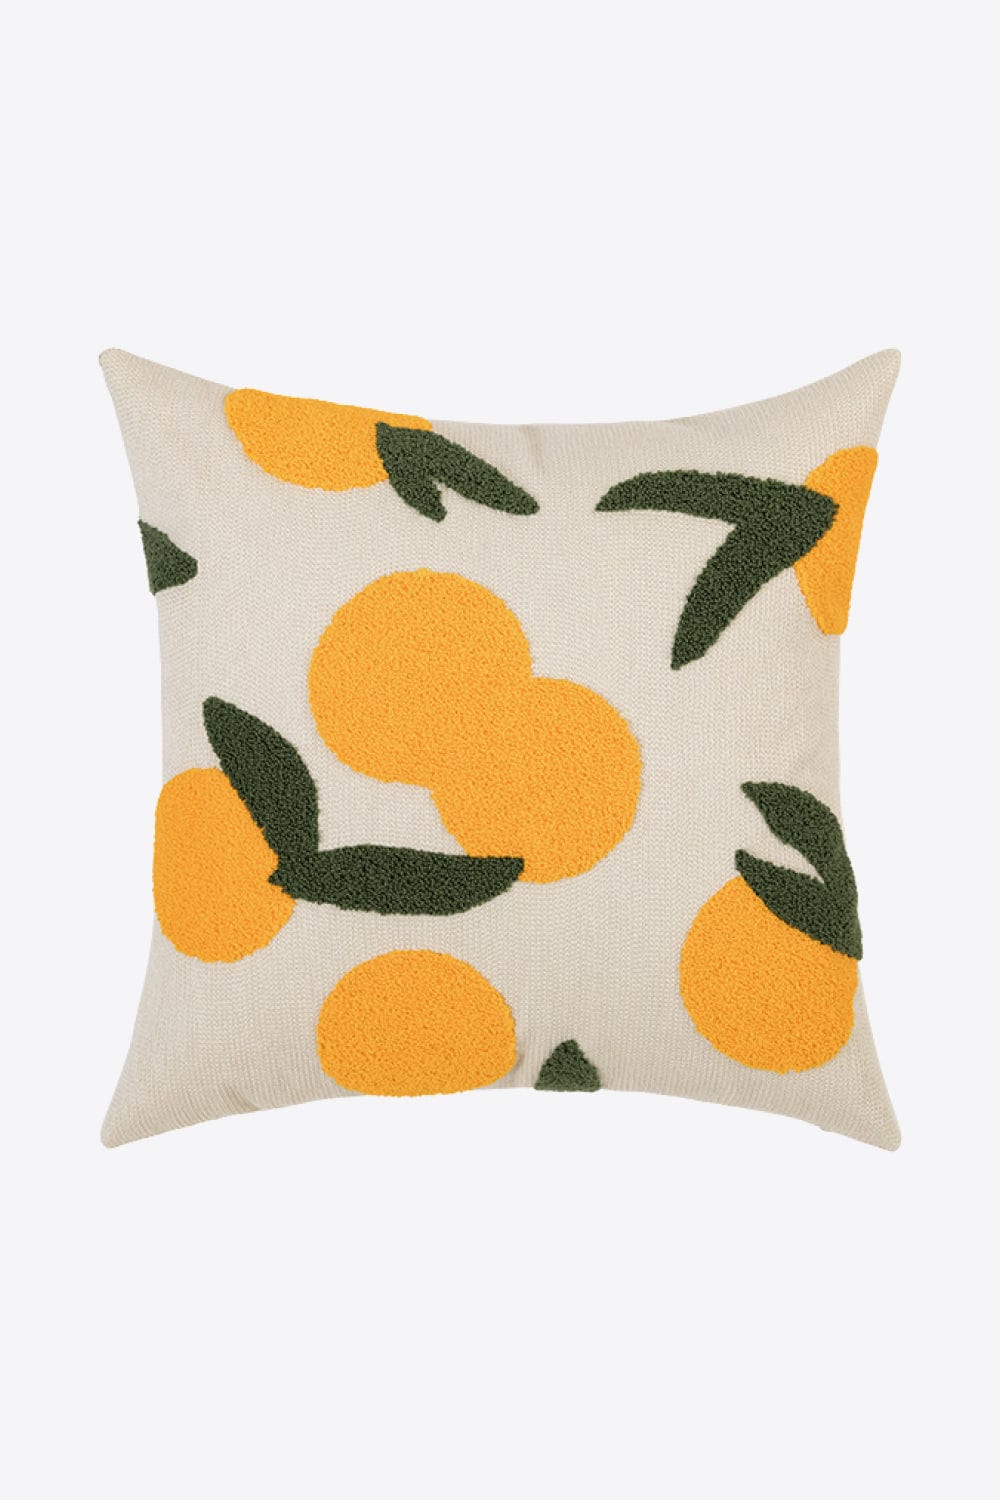 Tangerine / One Size Elements of Spring Punch-Needle Decorative Throw Pillow Case